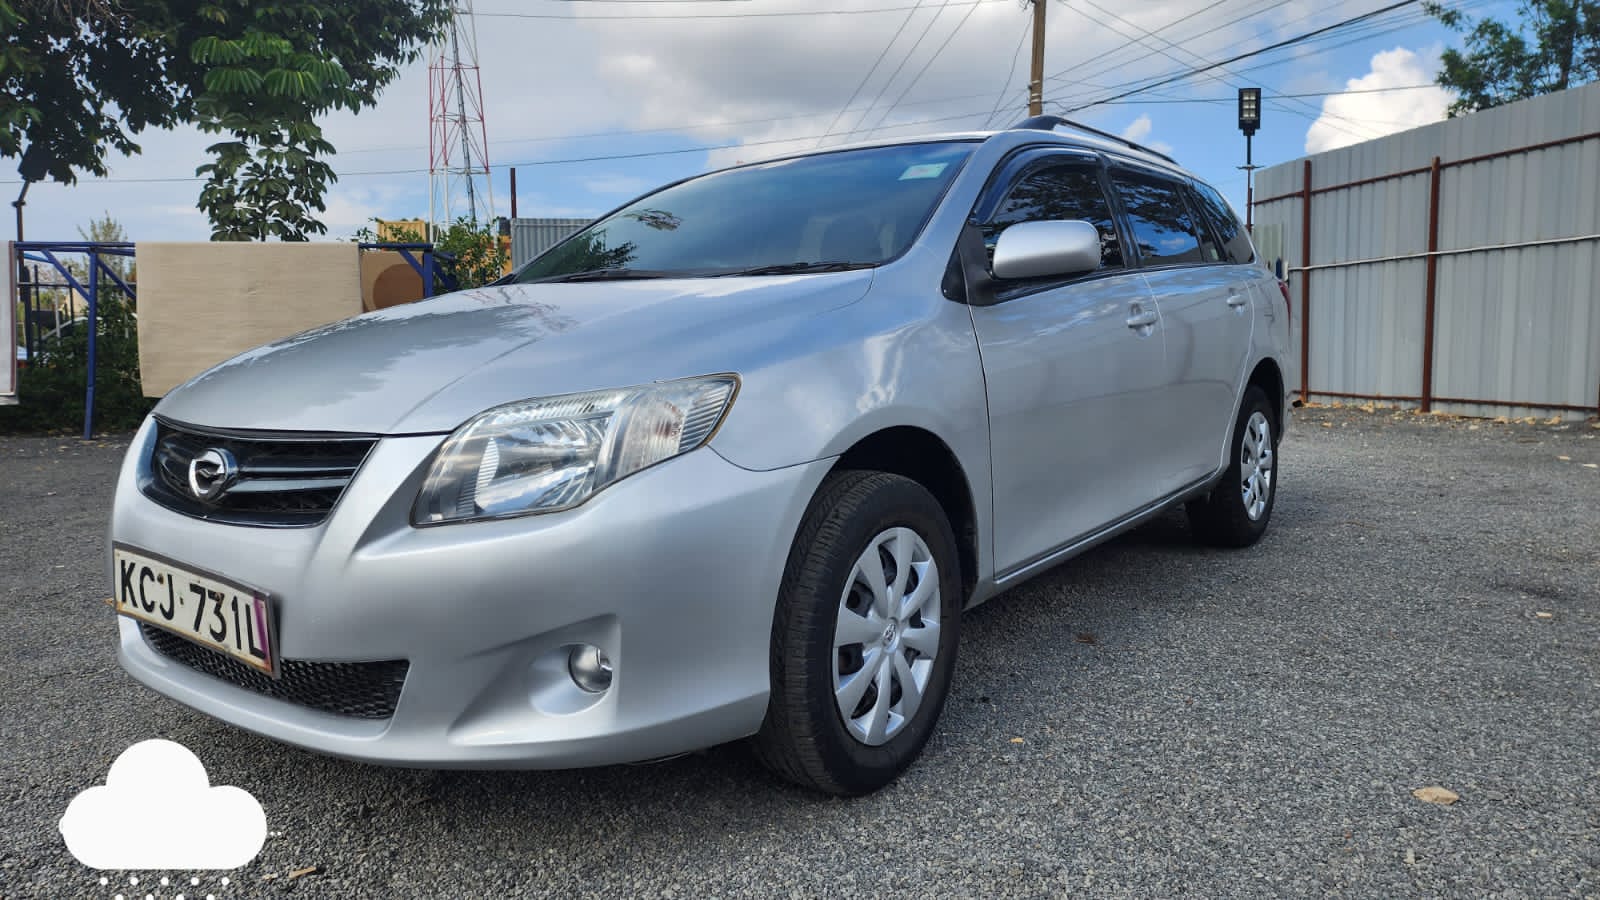 Toyota fielder 2011 QUICK SALE You Pay 20% Deposit Trade in OK EXCLUSIVE